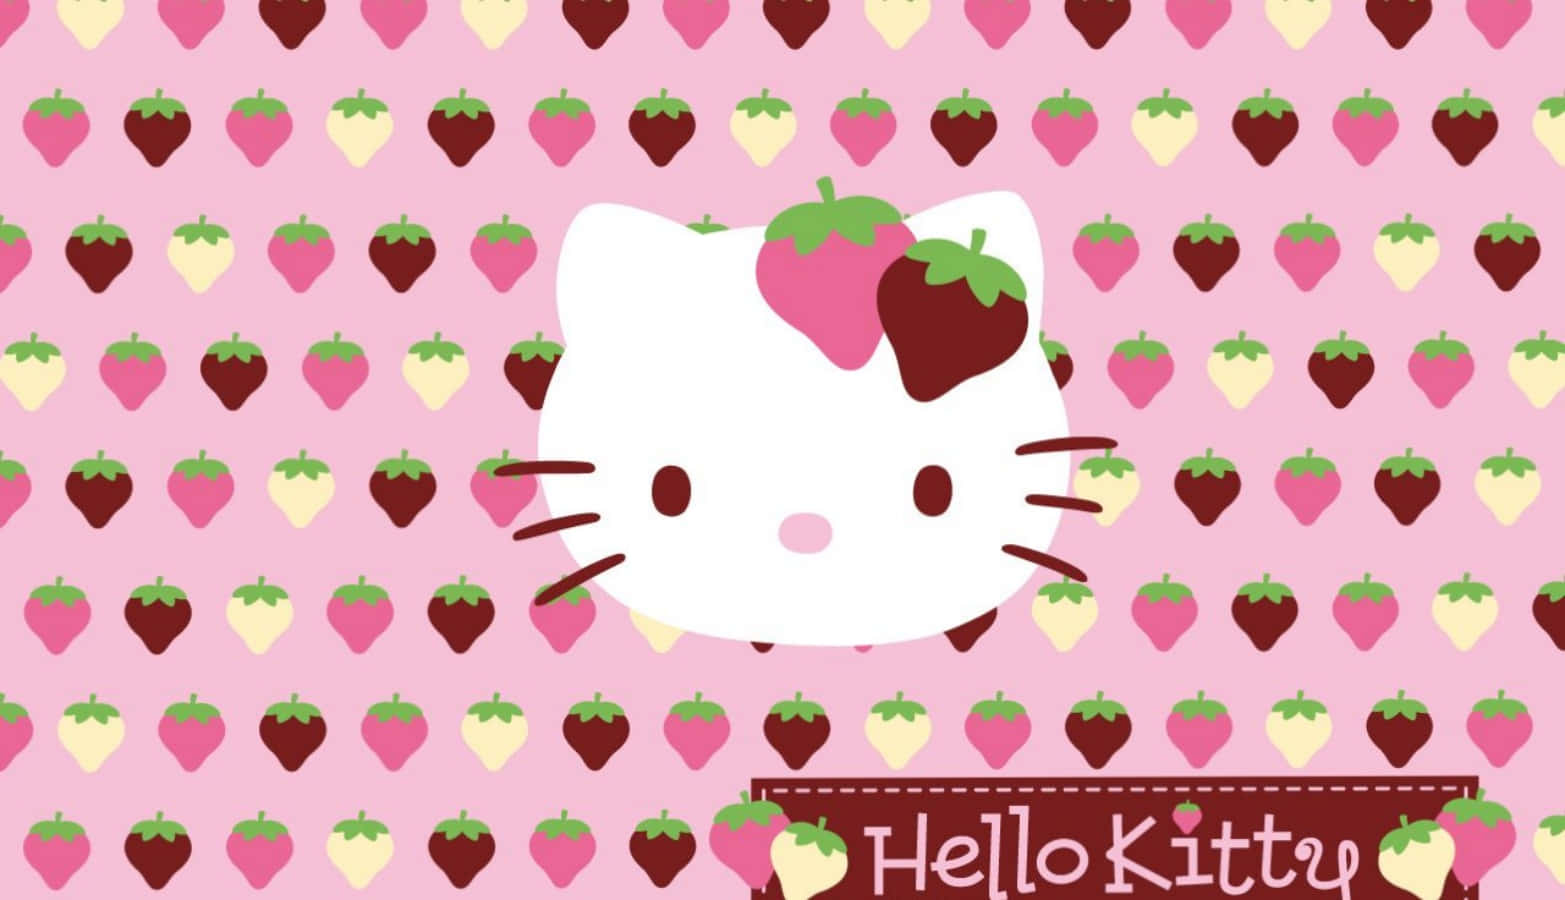 Get Ready For School With A Fun & Functional Hello Kitty Laptop Wallpaper